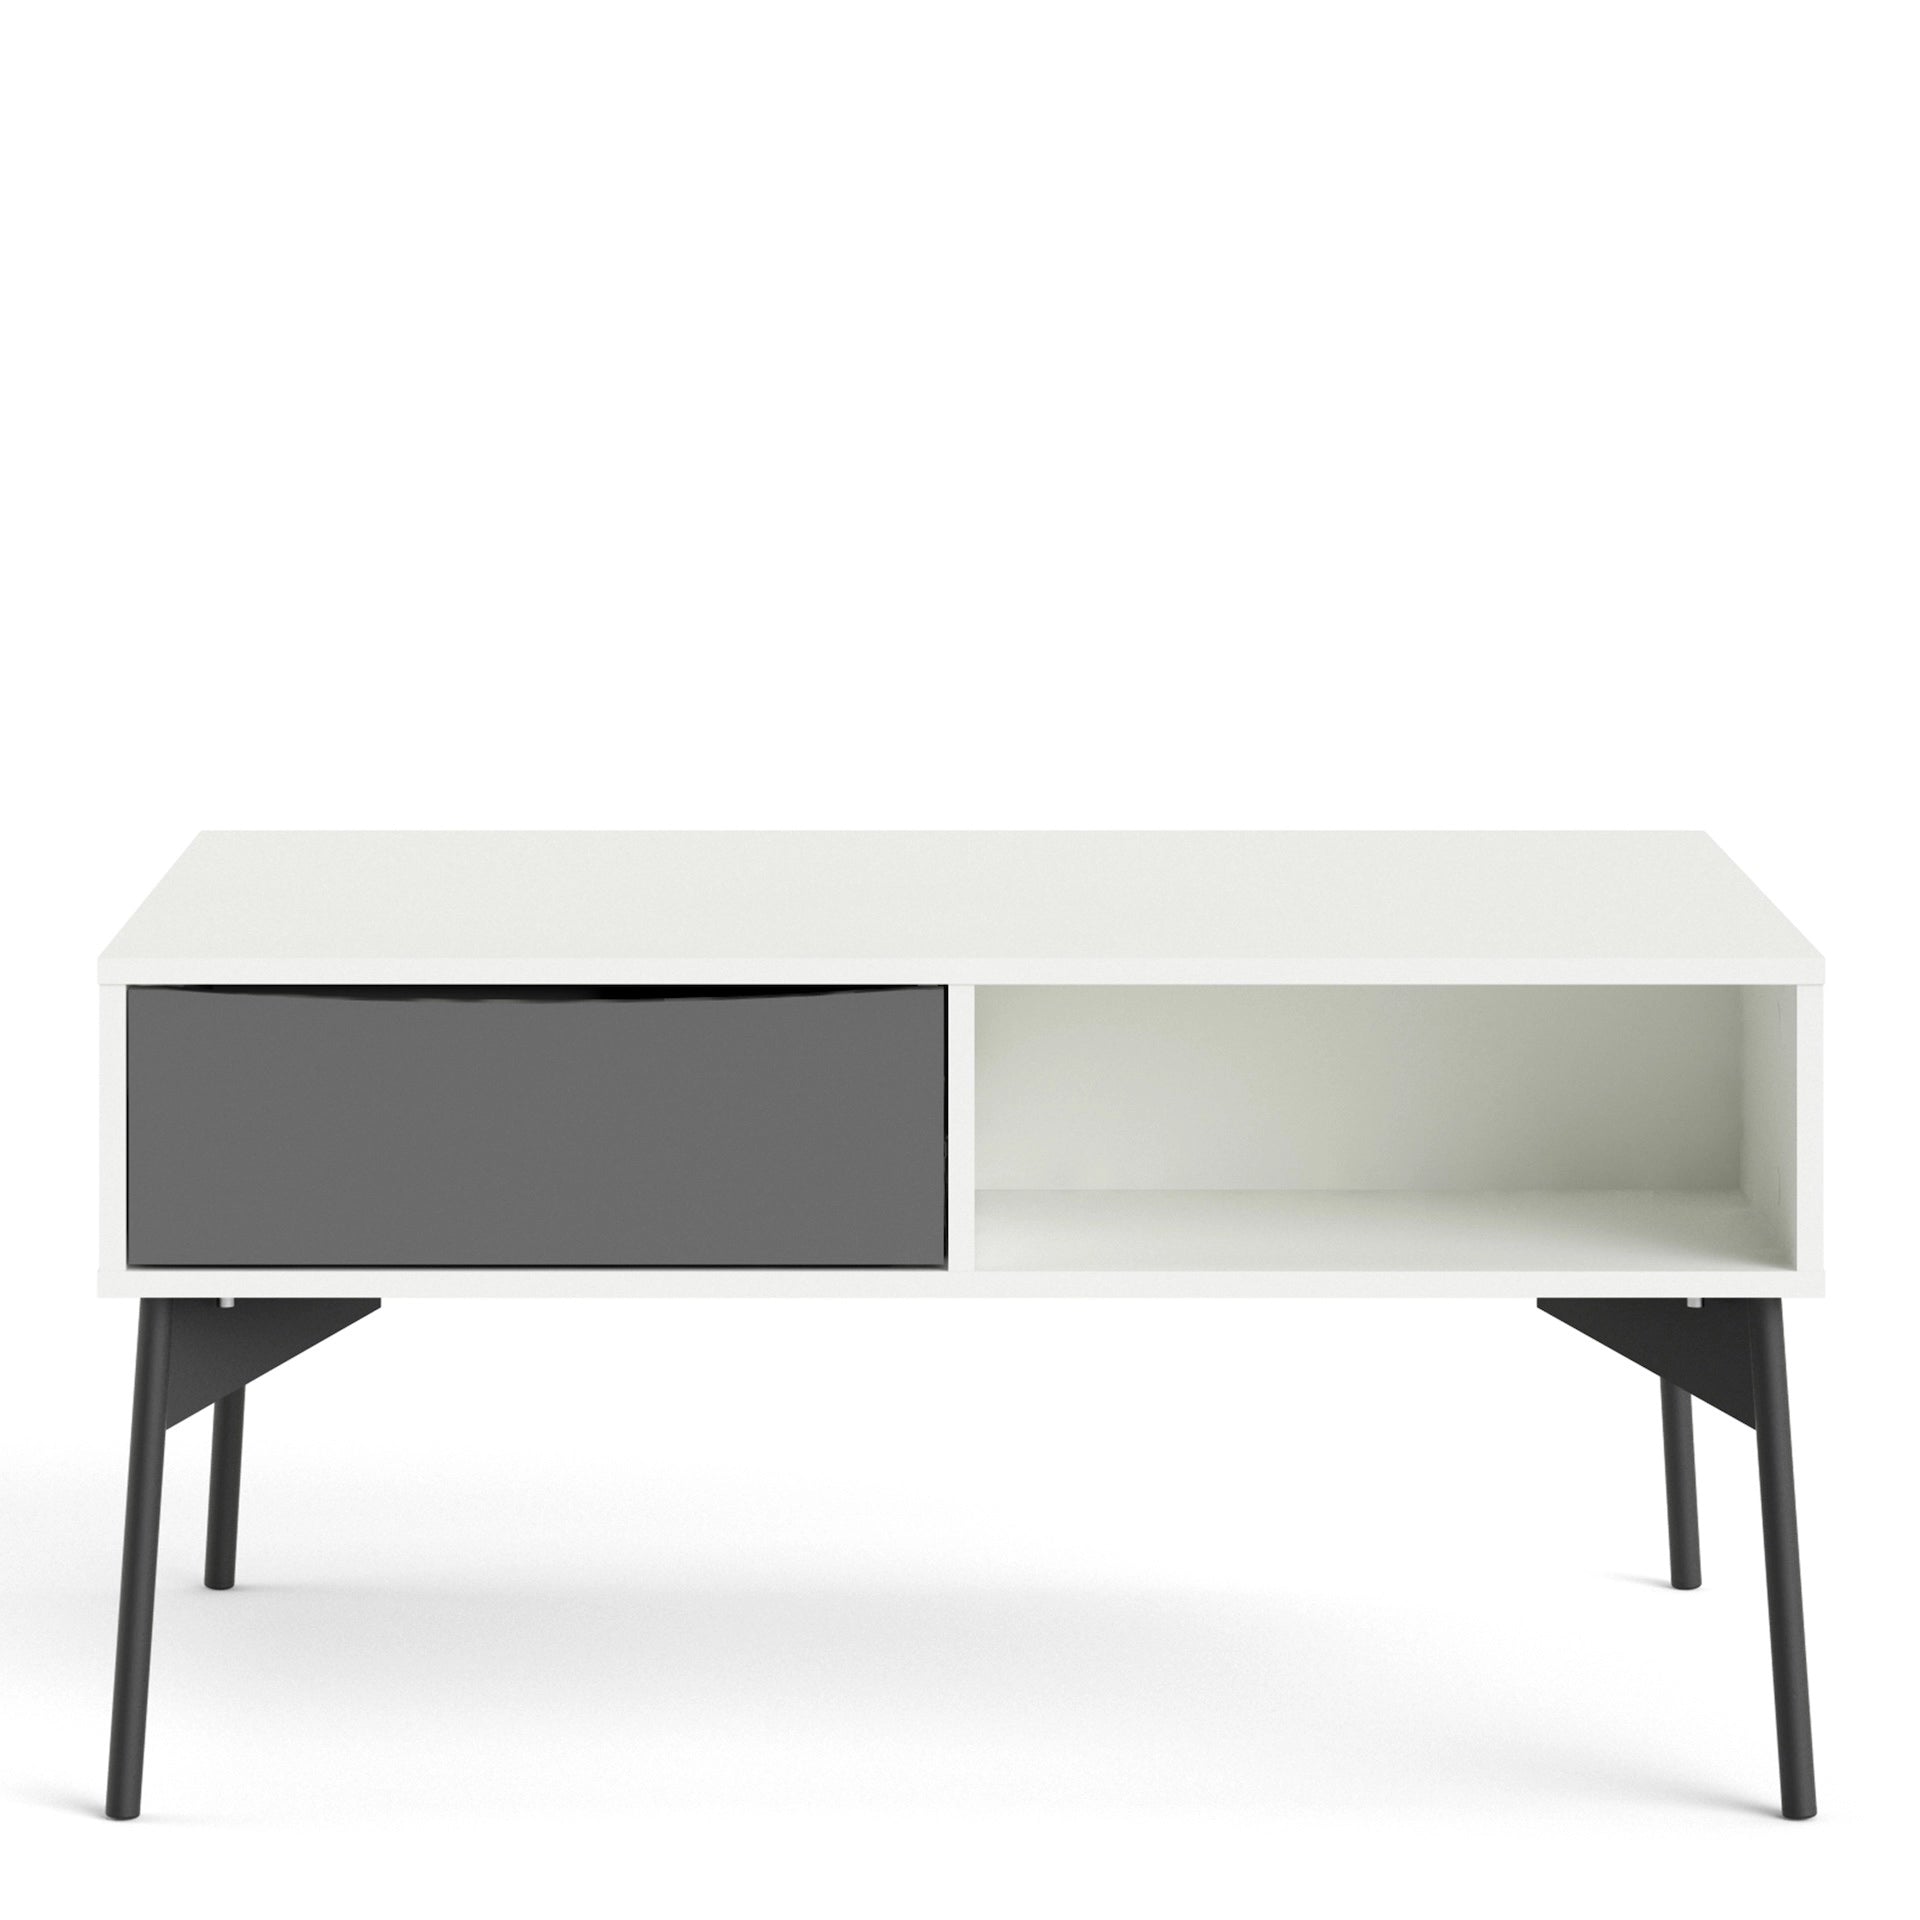 Furniture To Go Fur Coffee Table with 1 Drawer in Grey & White